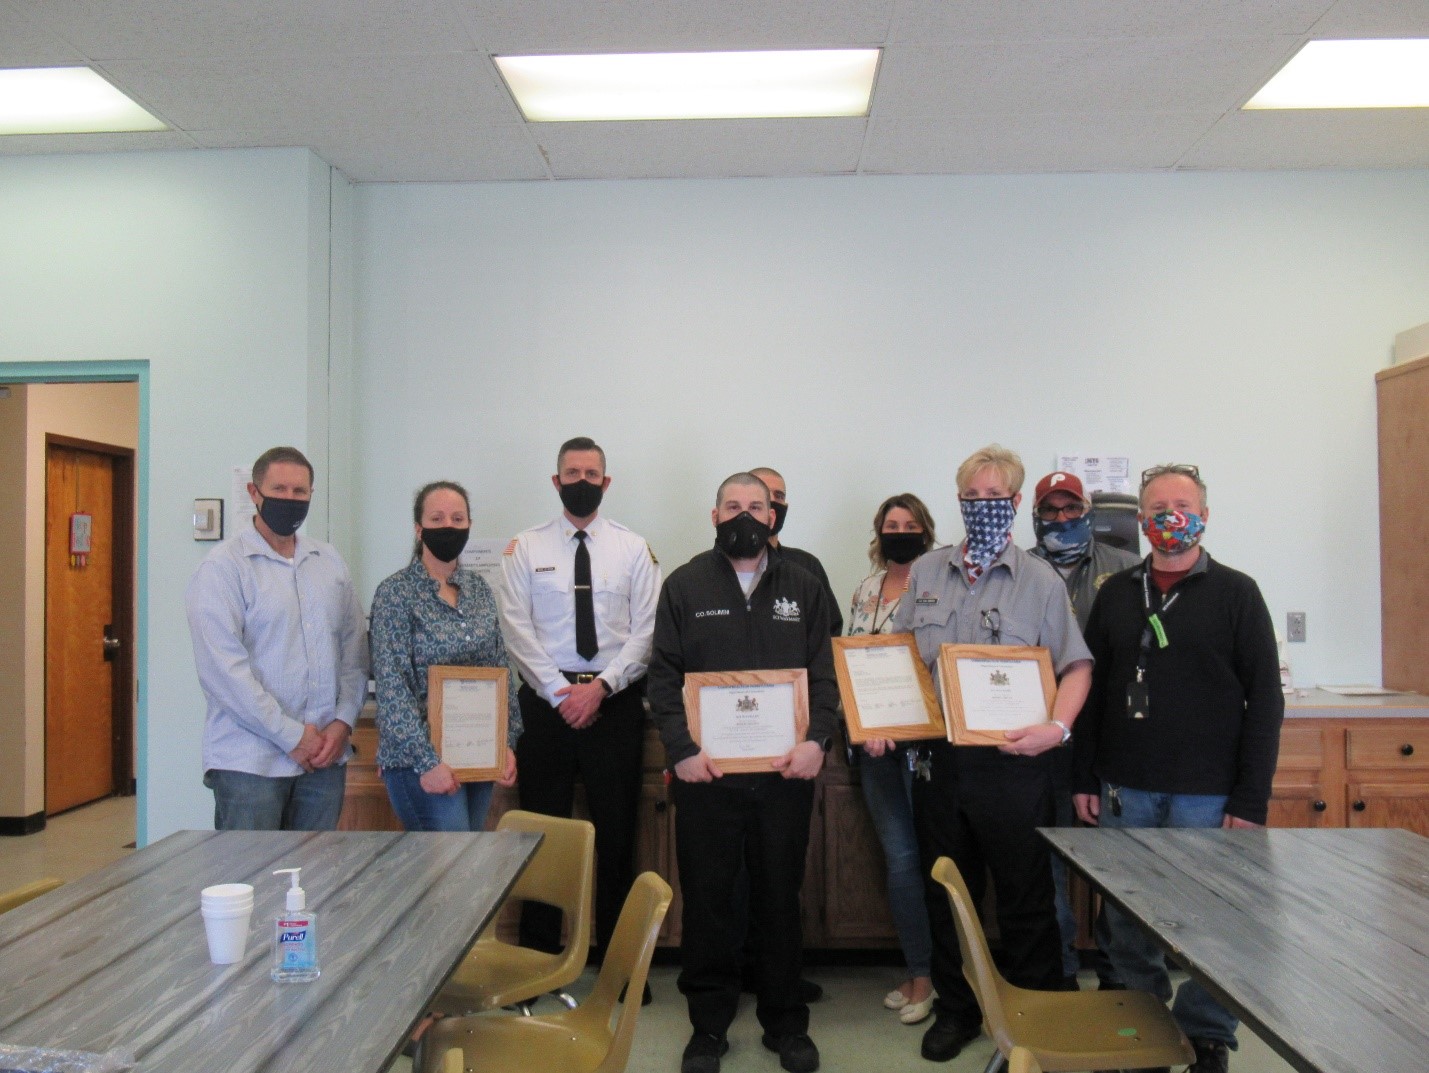 SCI Waymart leadership stand with employees who received awards